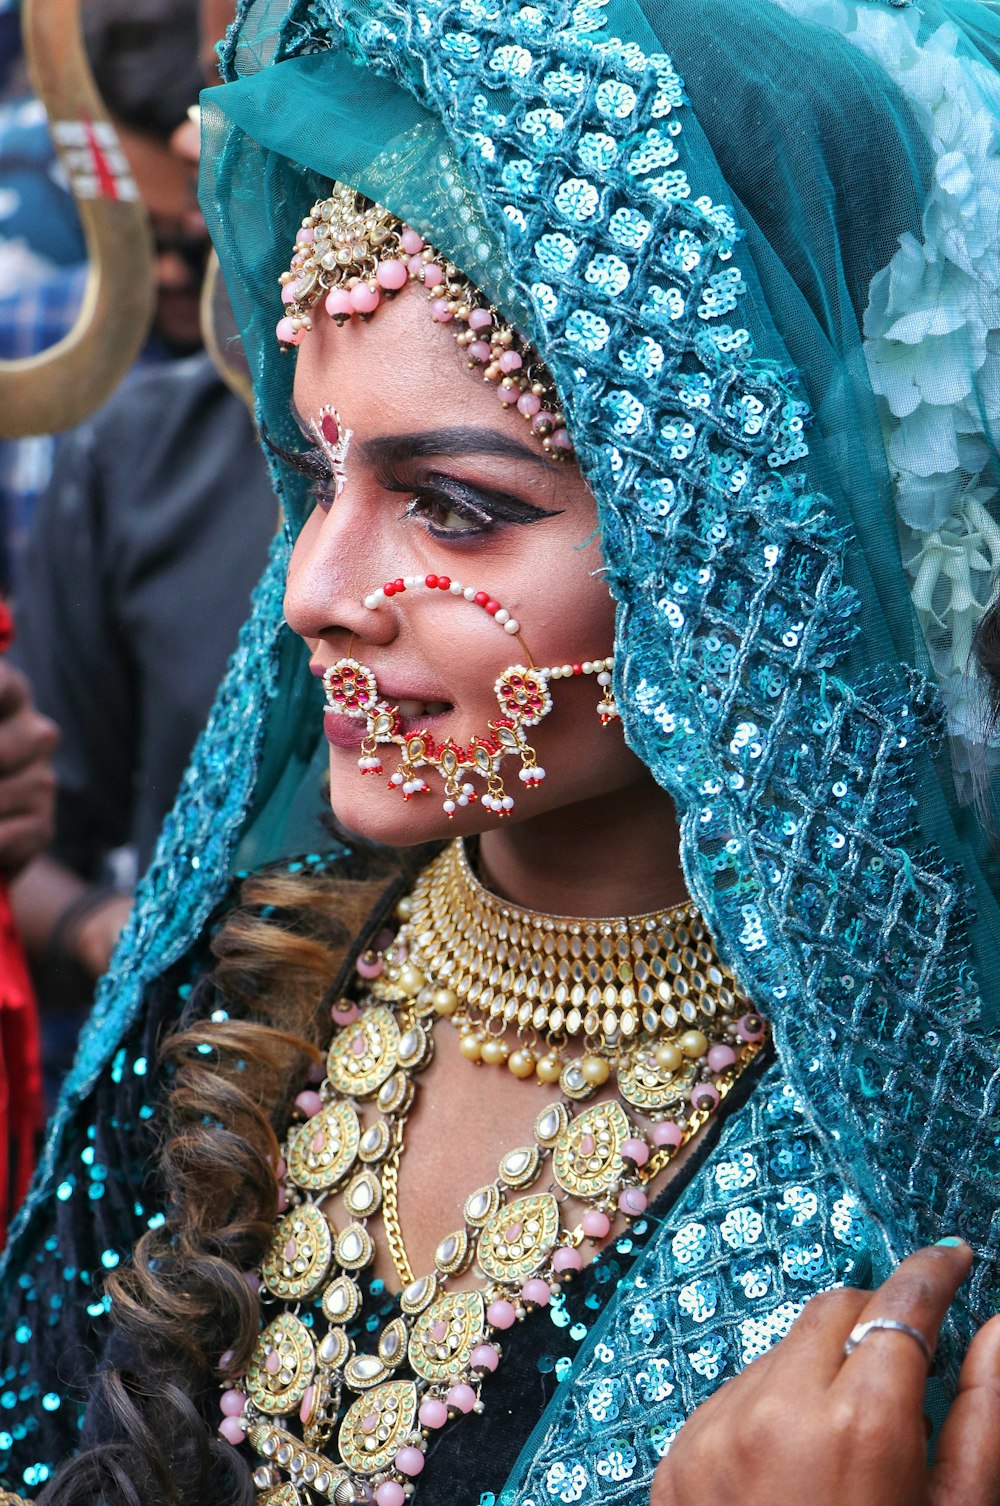 a woman wearing a blue veil and jewelry